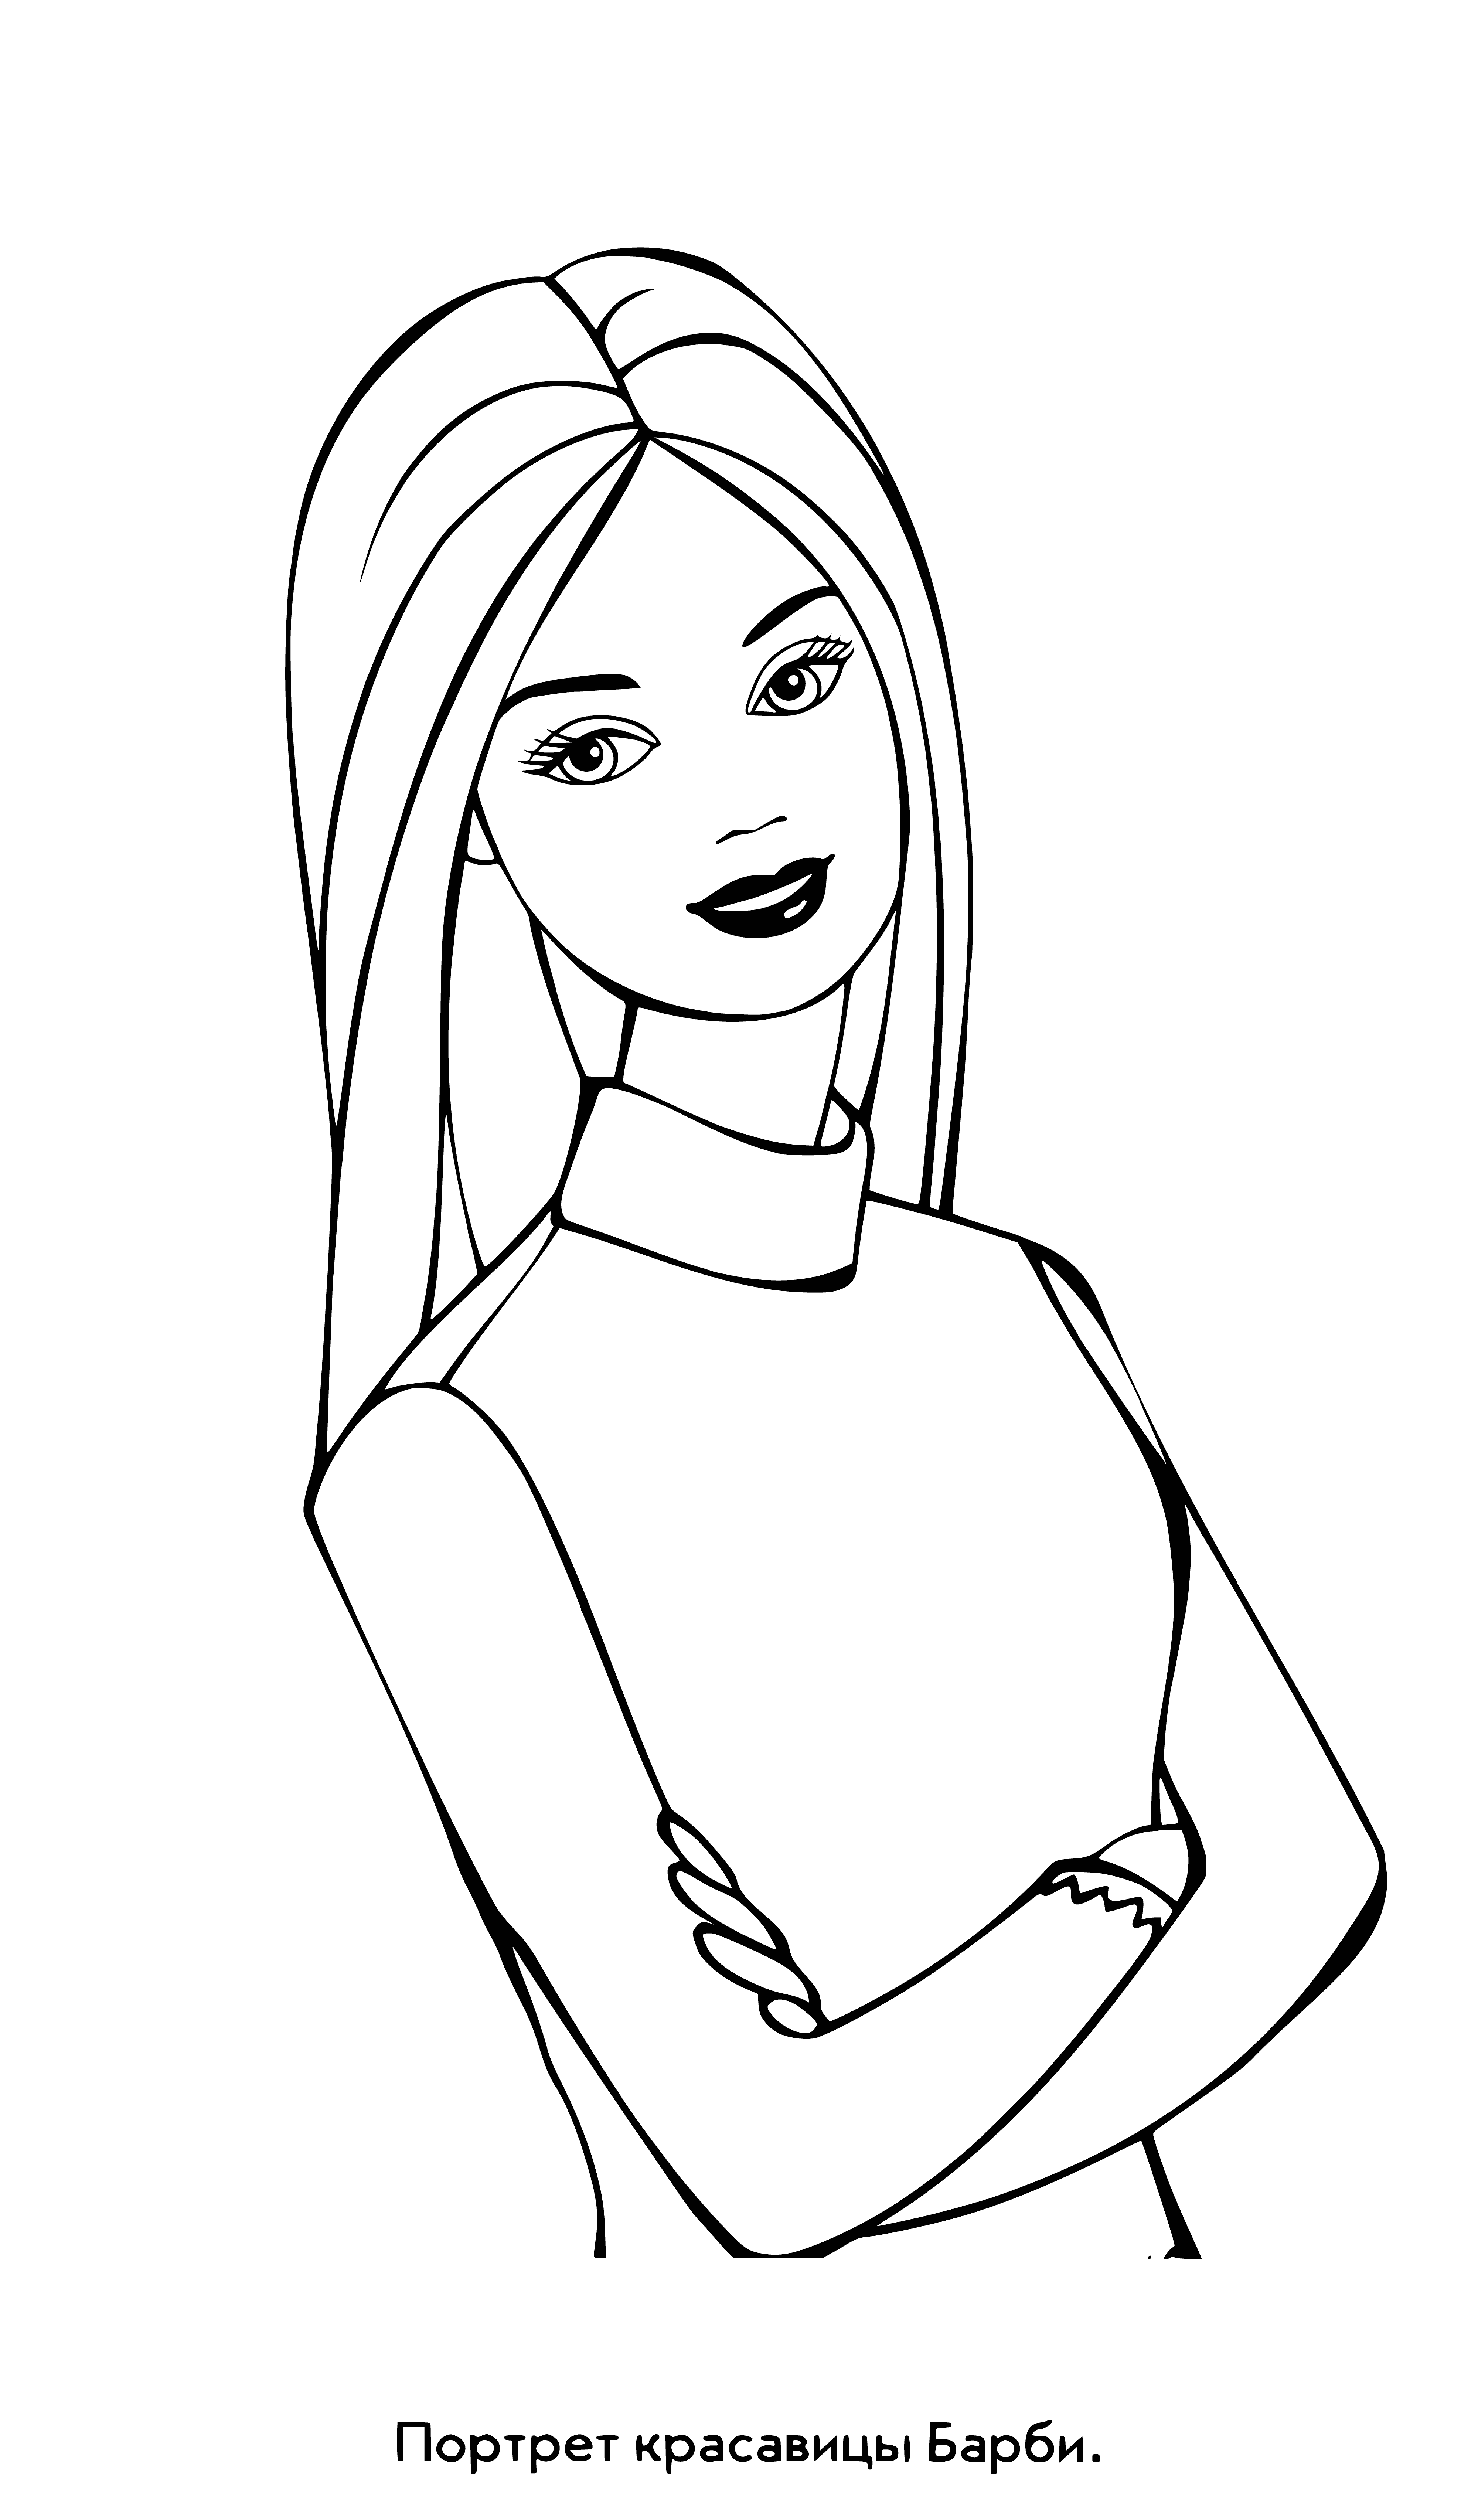 coloring page: Barbie doll in coloring page wears pink dress, heels, has blonde hair and blue eyes.